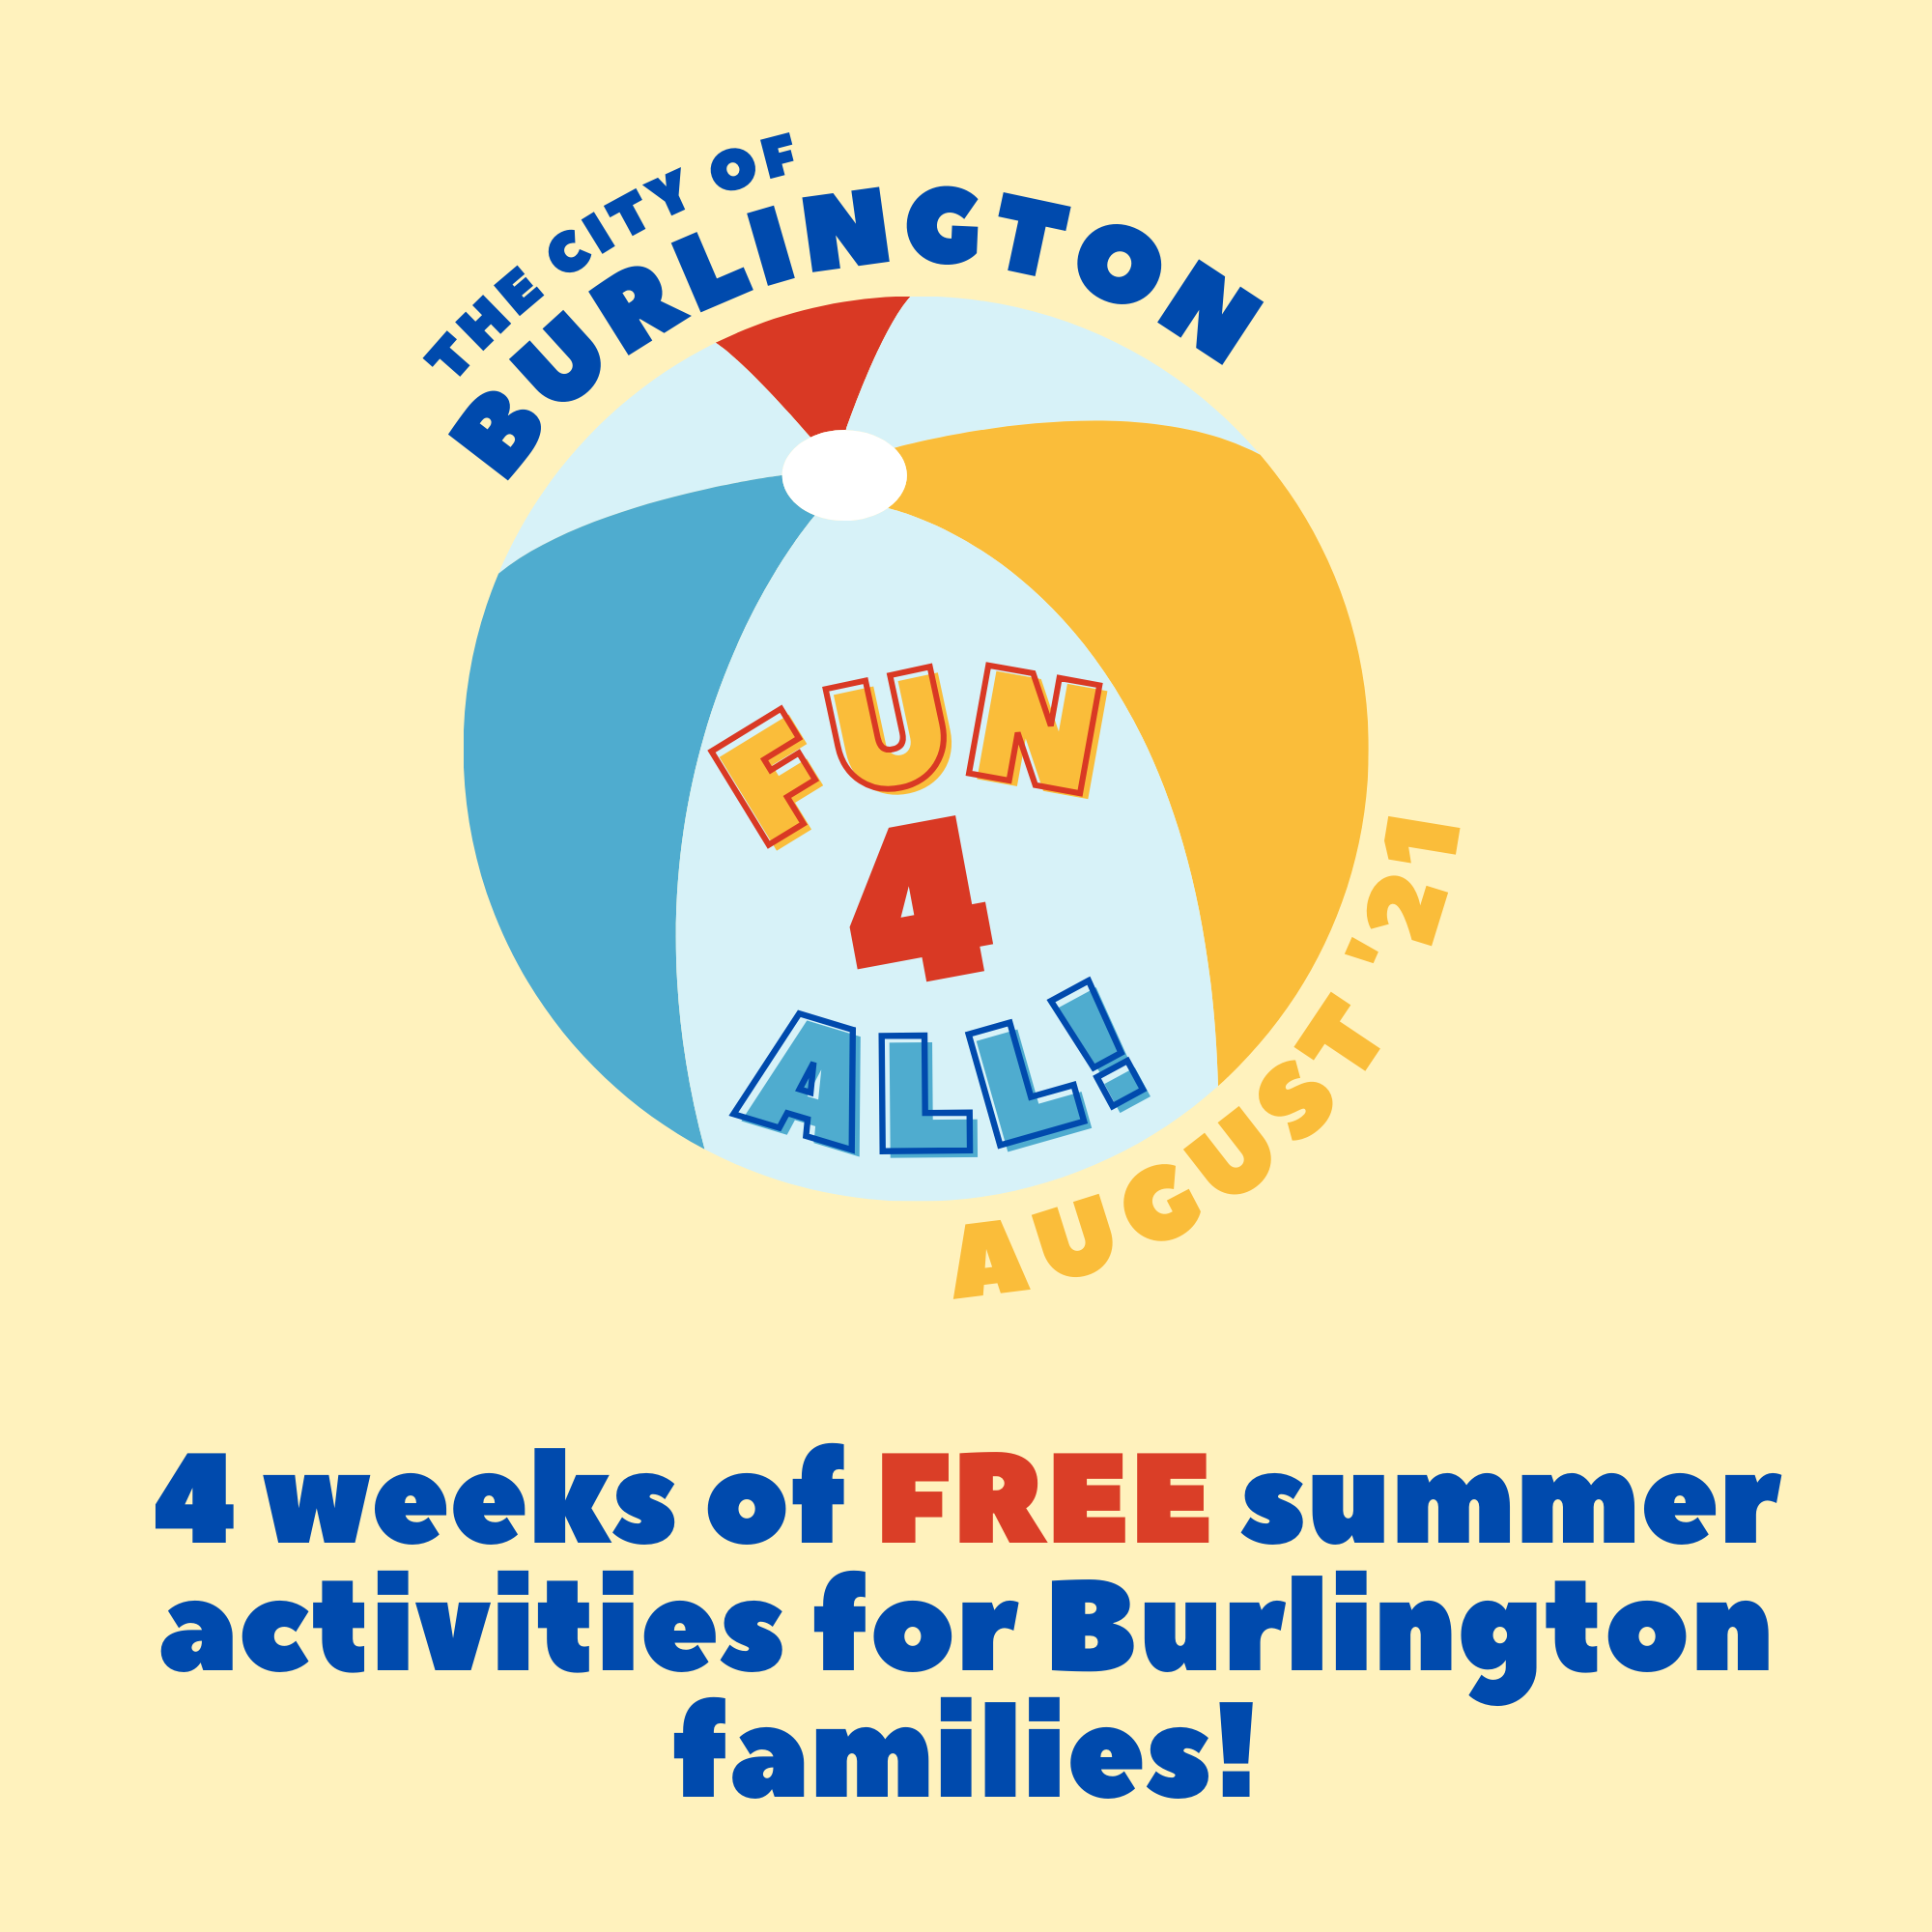 Burlington residents: 4 weeks of FREE summer activities for Burlington families. Fun for all! Image of a beach ball.